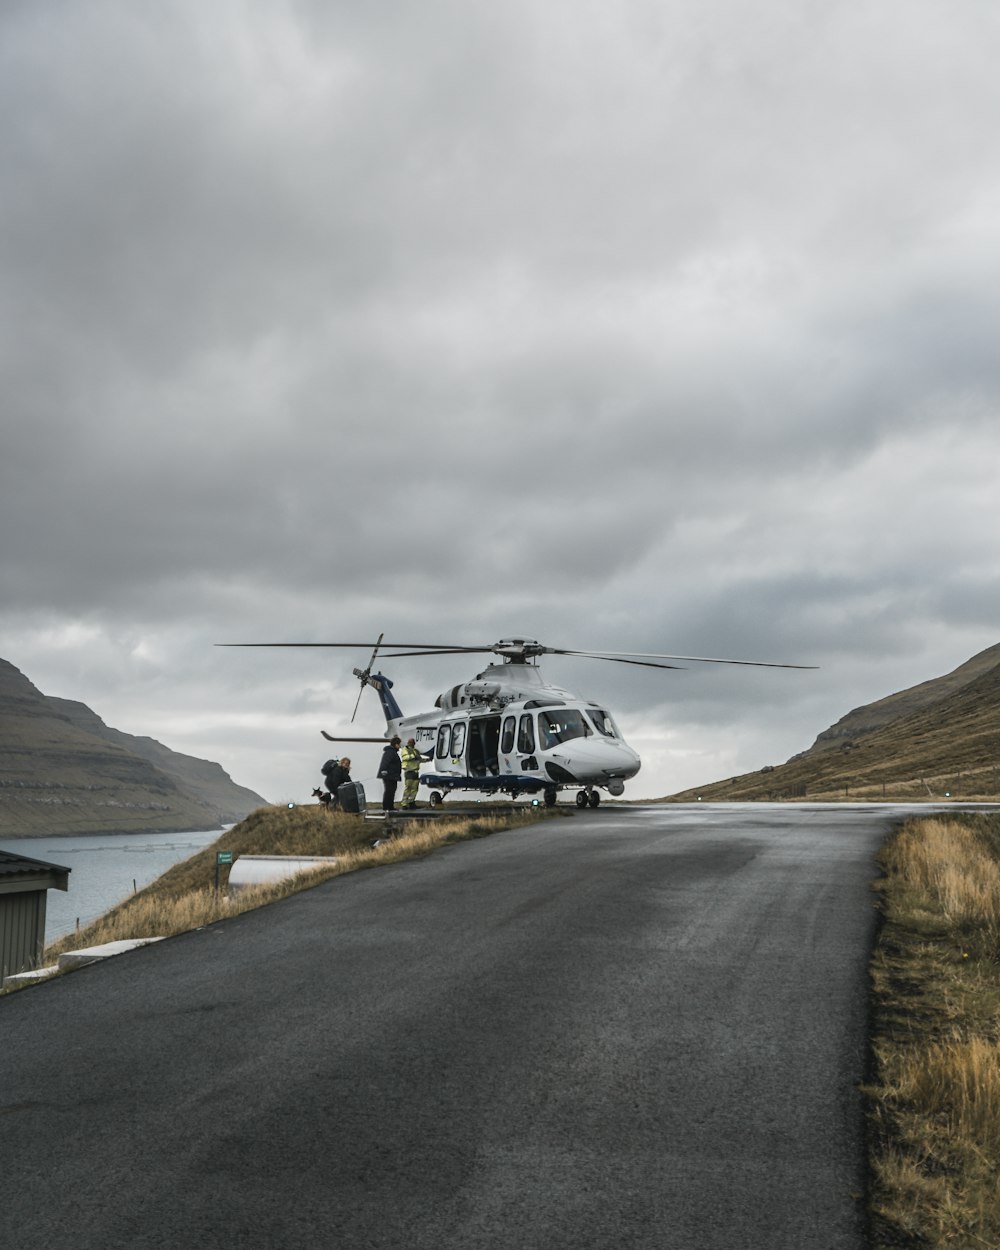 black helicopter on gray asphalt road near brown mountain under gray sky during daytime